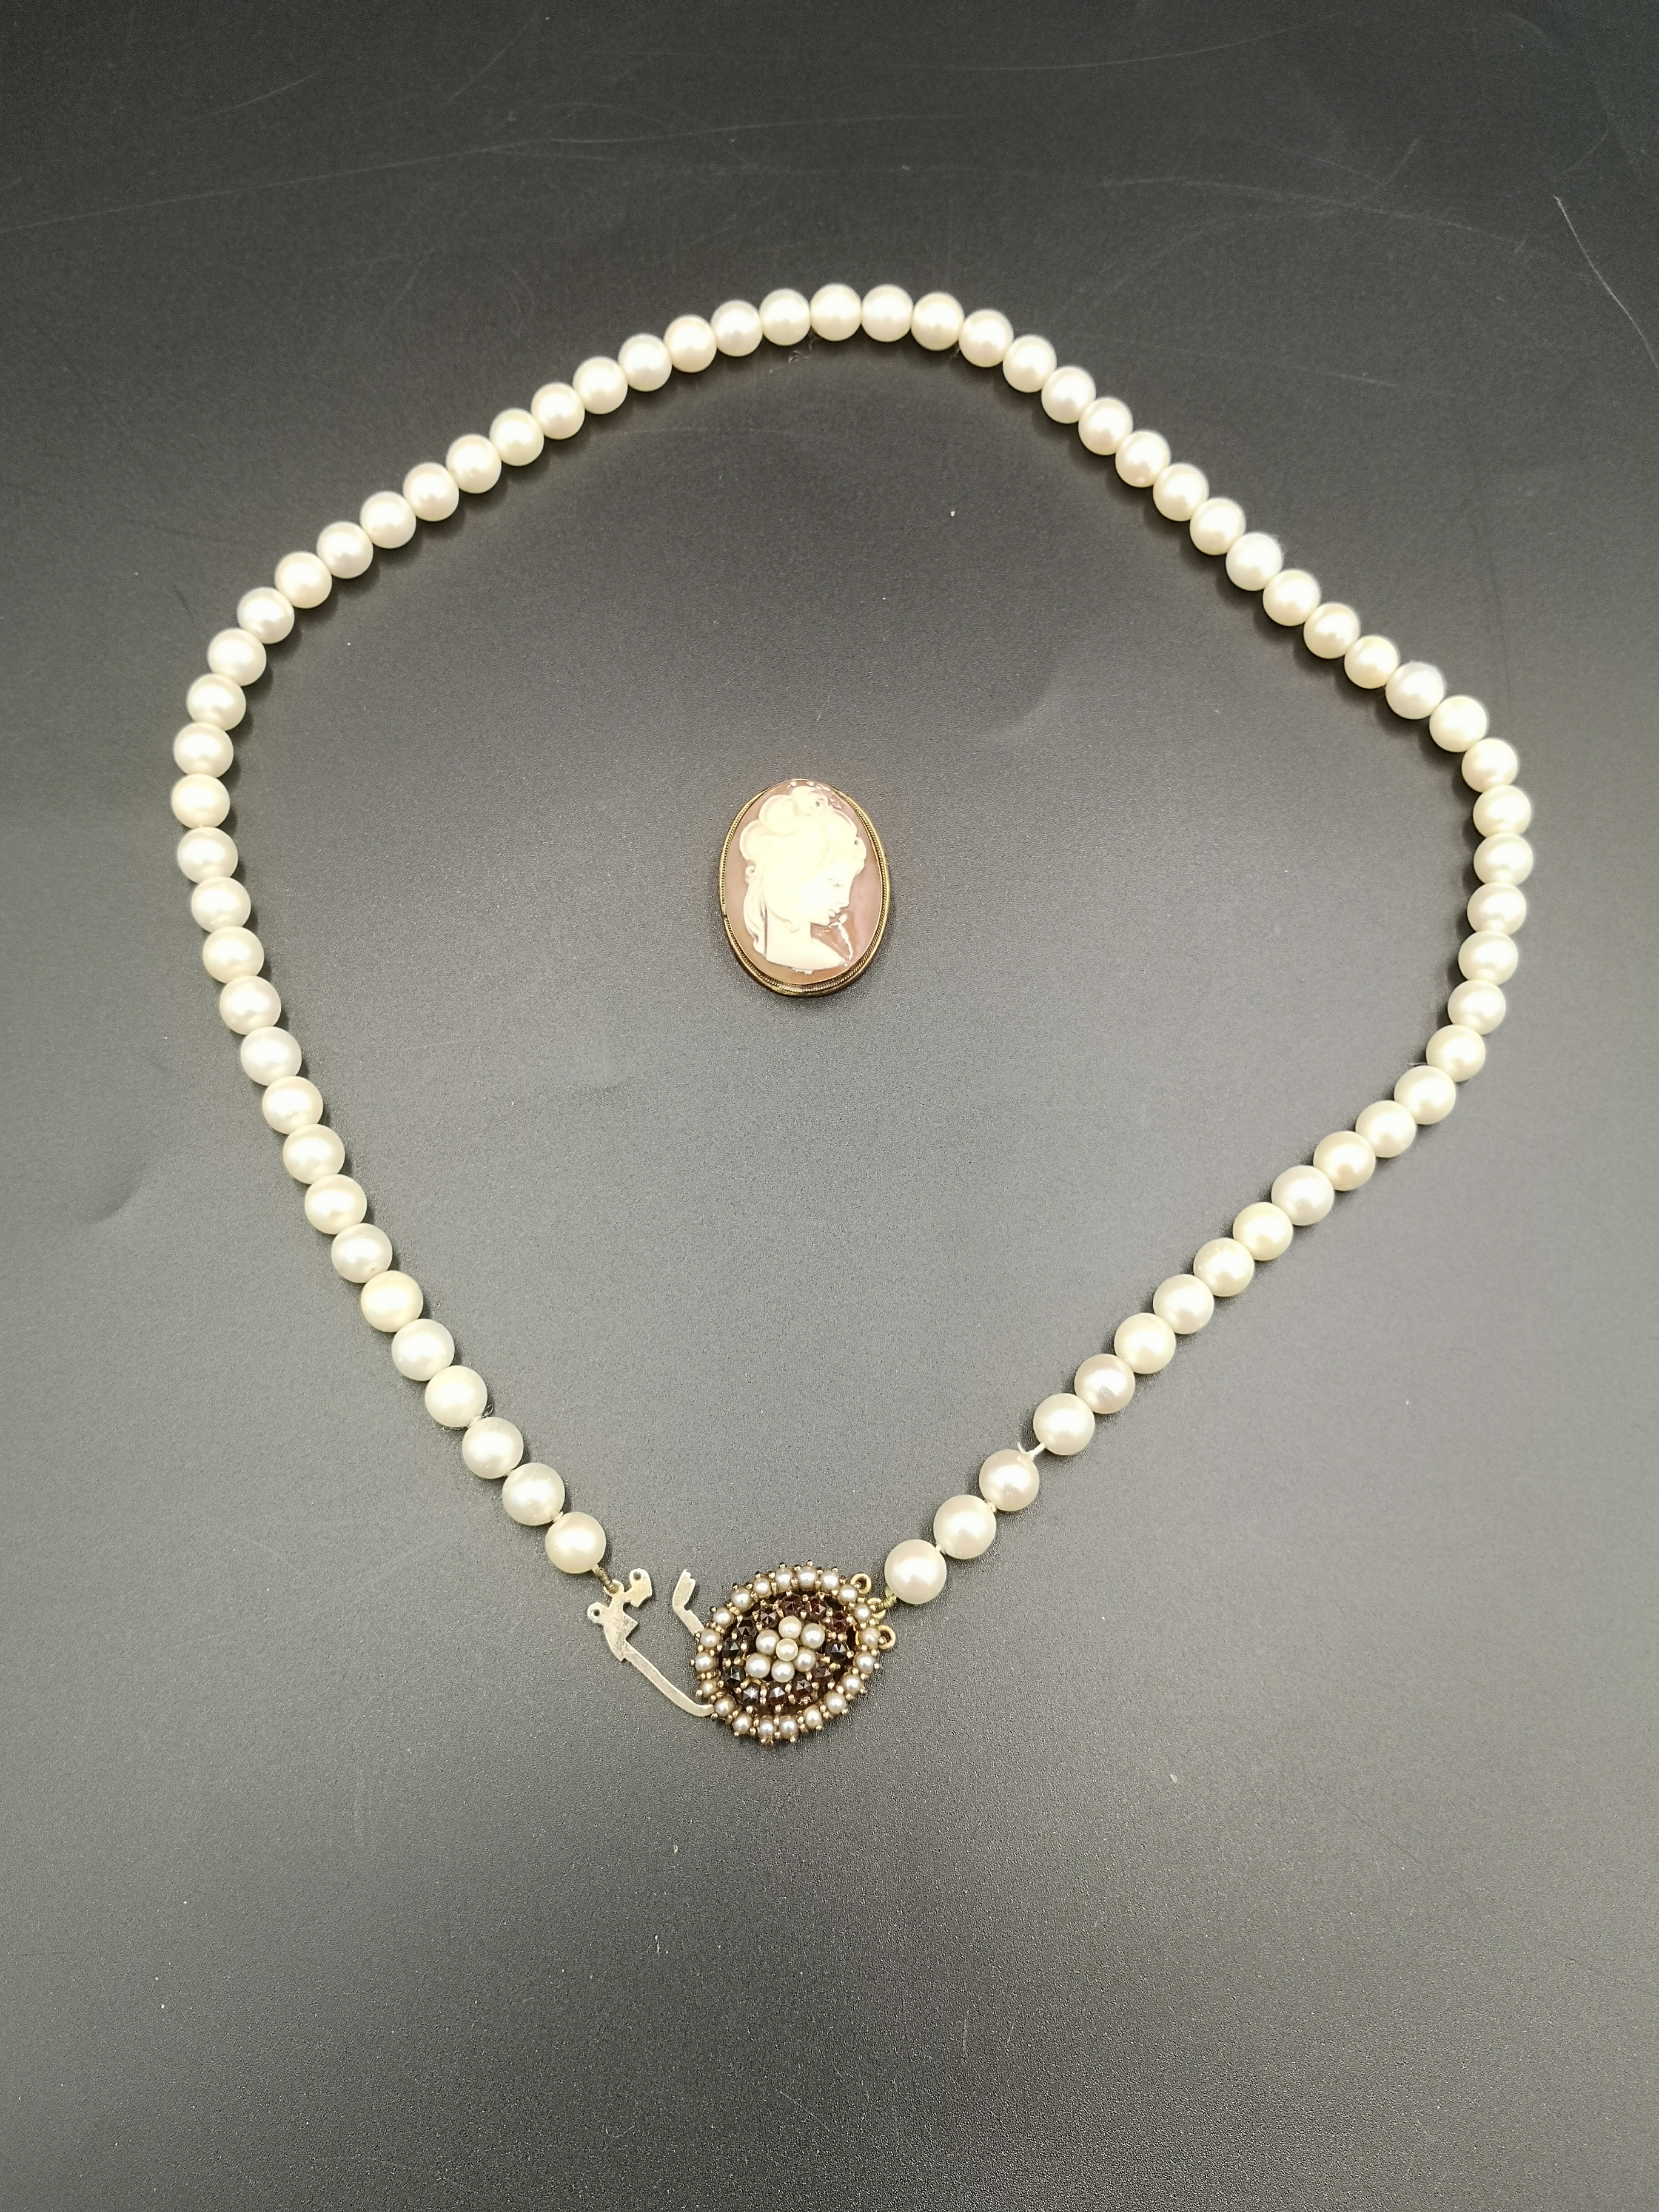 Cameo brooch together with a pearl necklace